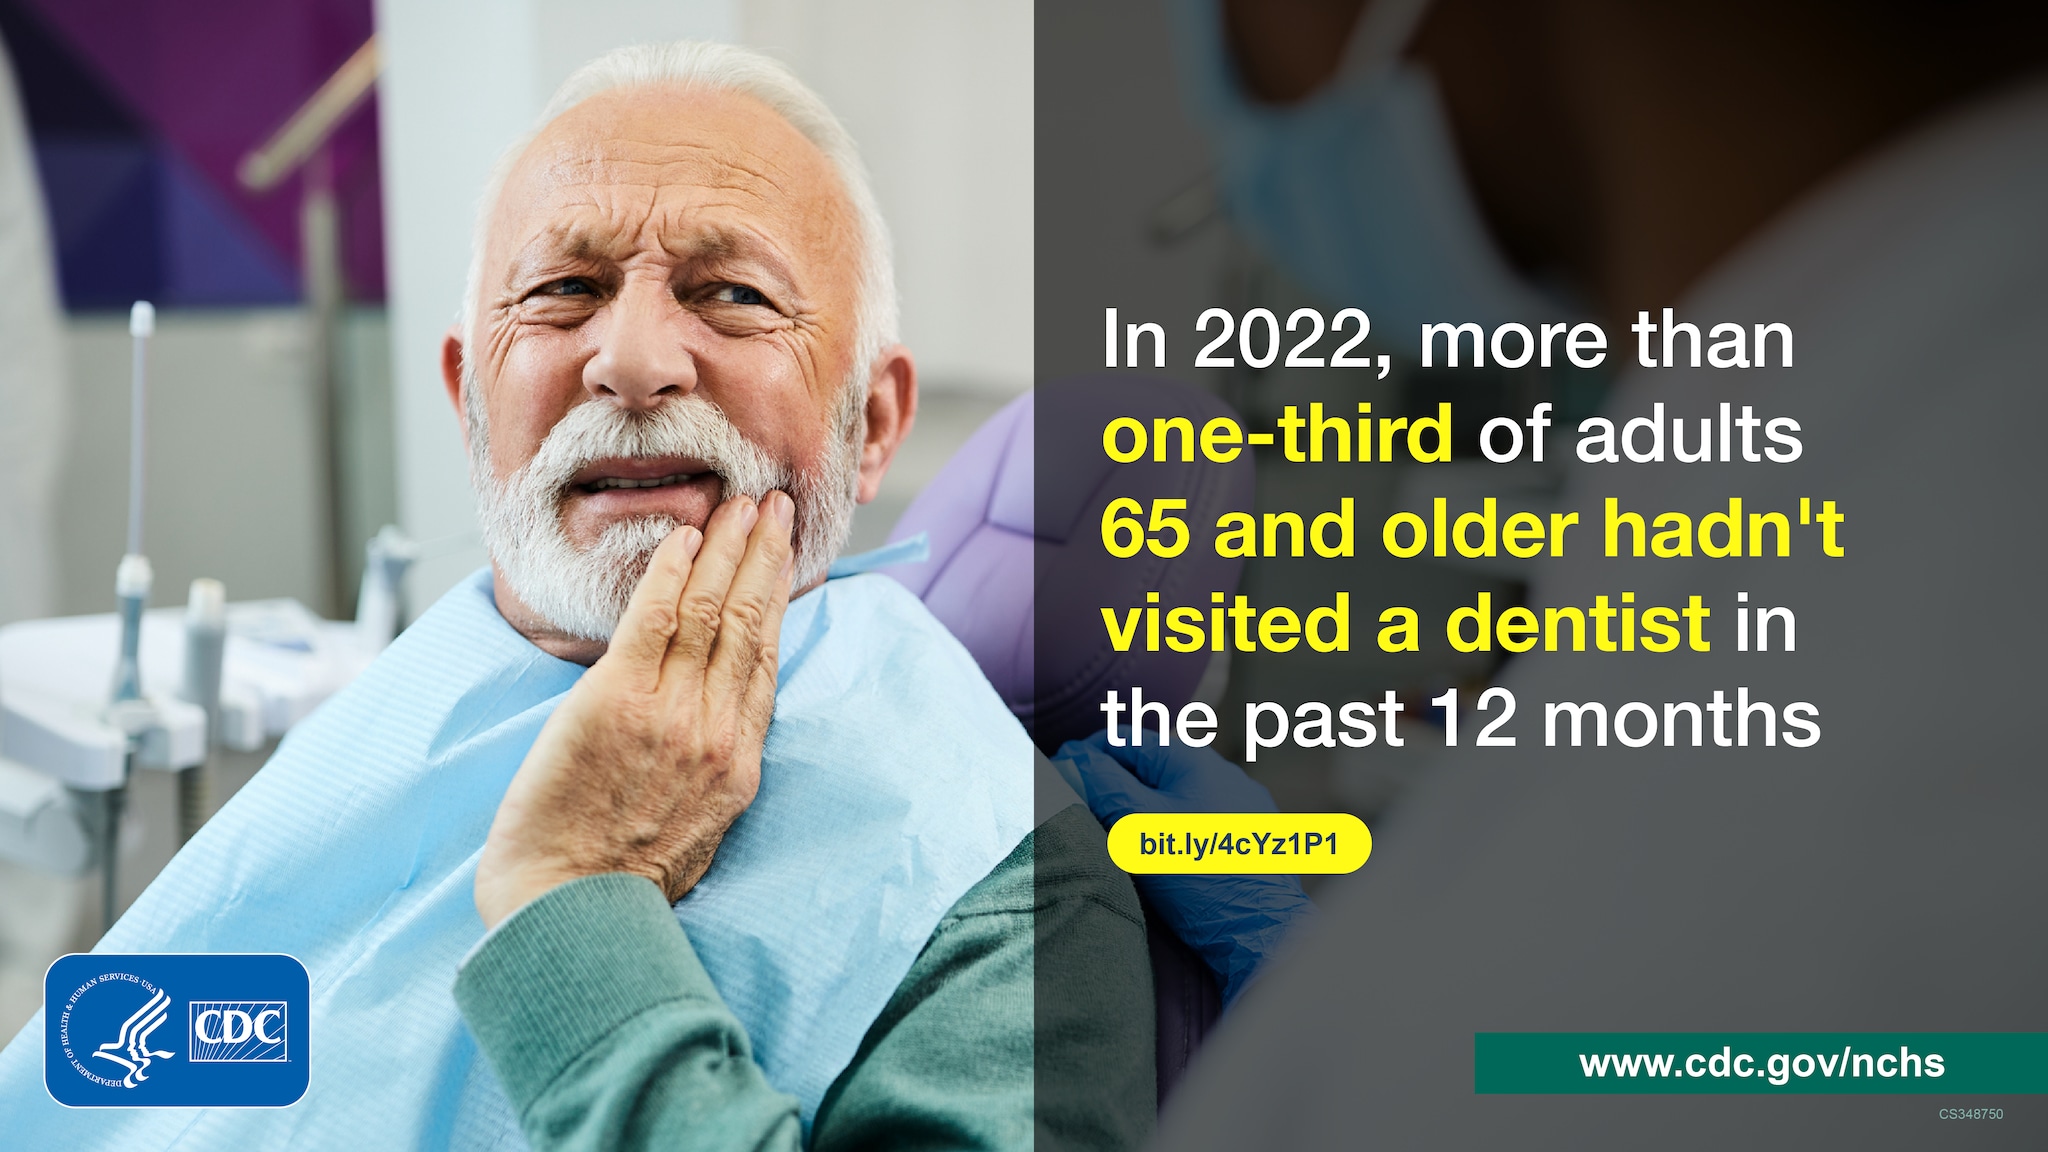 An old man sitting in a dental chair, with his hand over his cheek and a pained expression on his face. The text reads: “In 2022, more than one-third of adults 65 and older hadn’t visited a dentist in the past 12 months.”